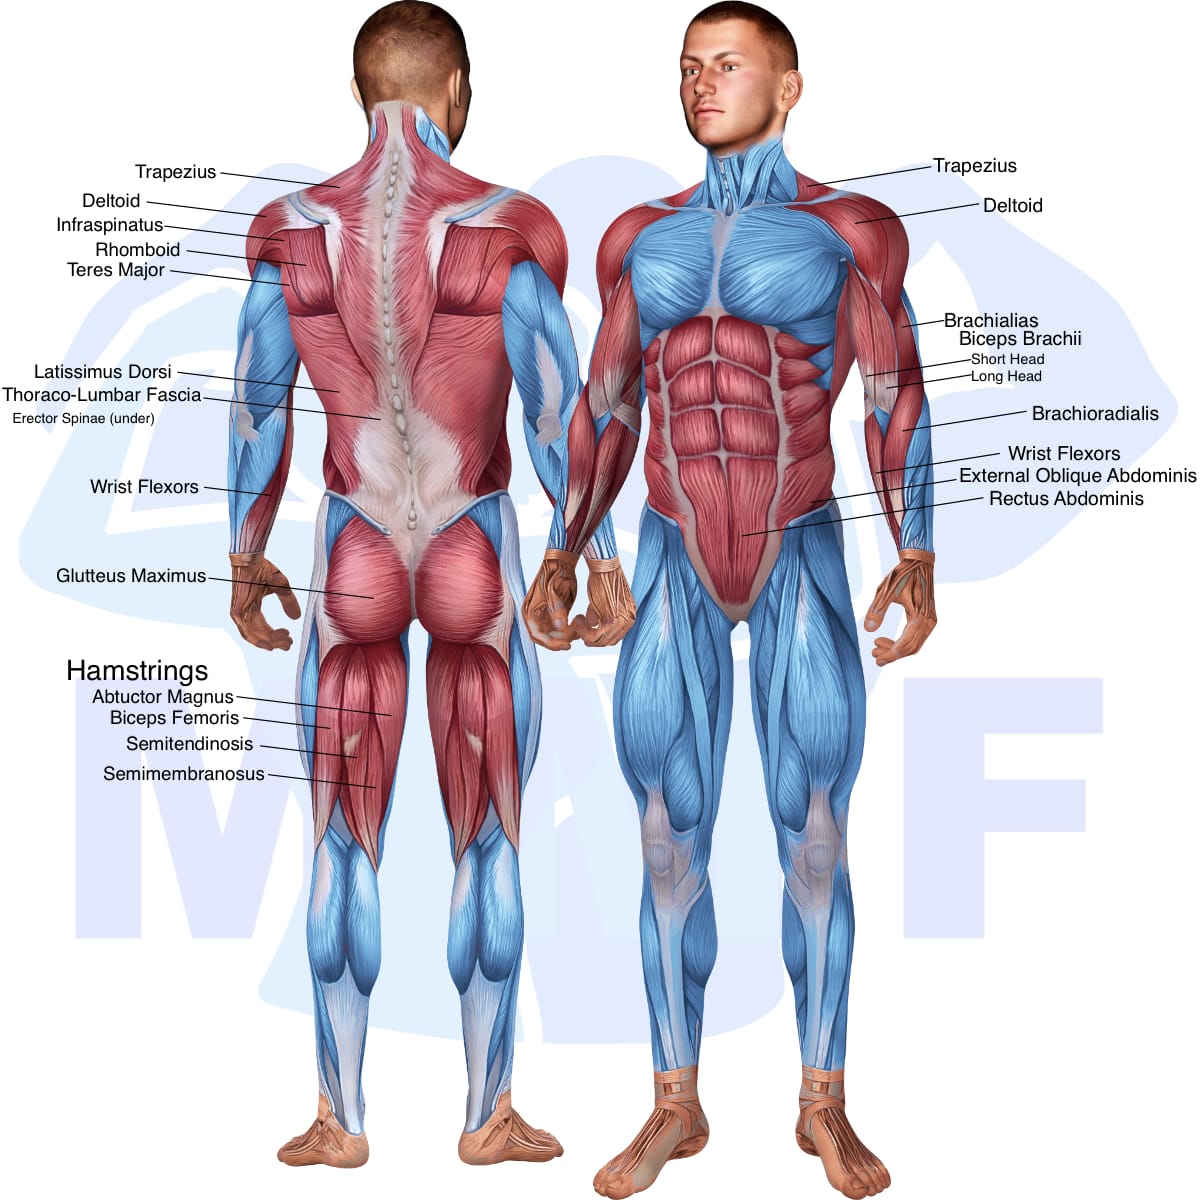 Image of the skeletal muscular system with the muscles used in the dumbbell supported one arm row exercise highlighted in red and the rest in blue.